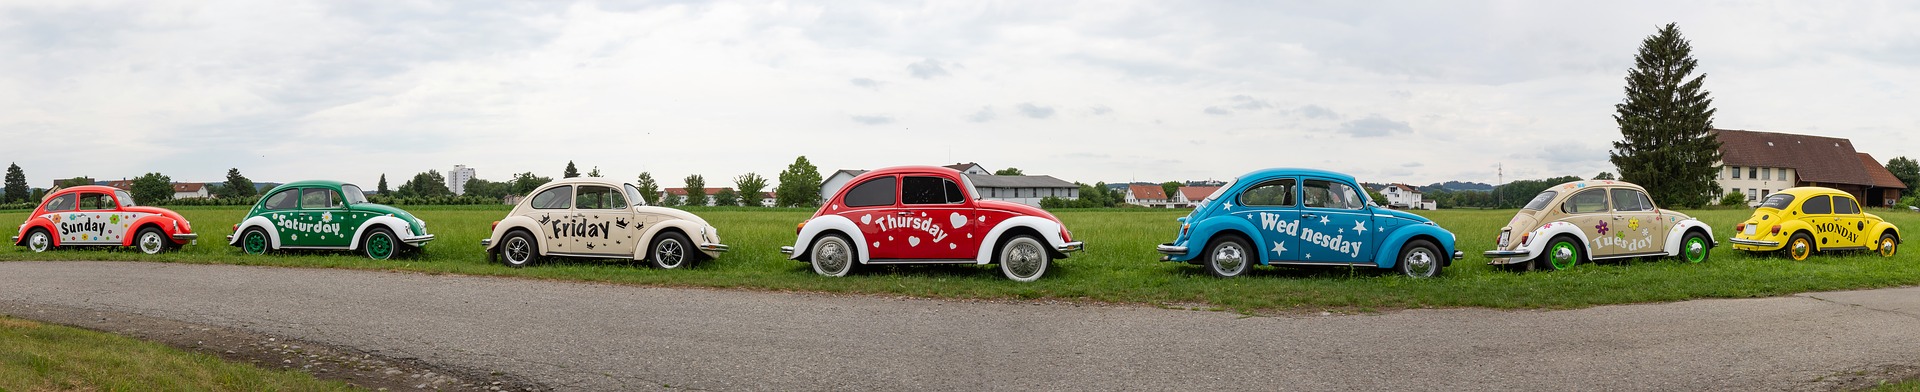 Volkswagen Bugs with days of the week printed on them